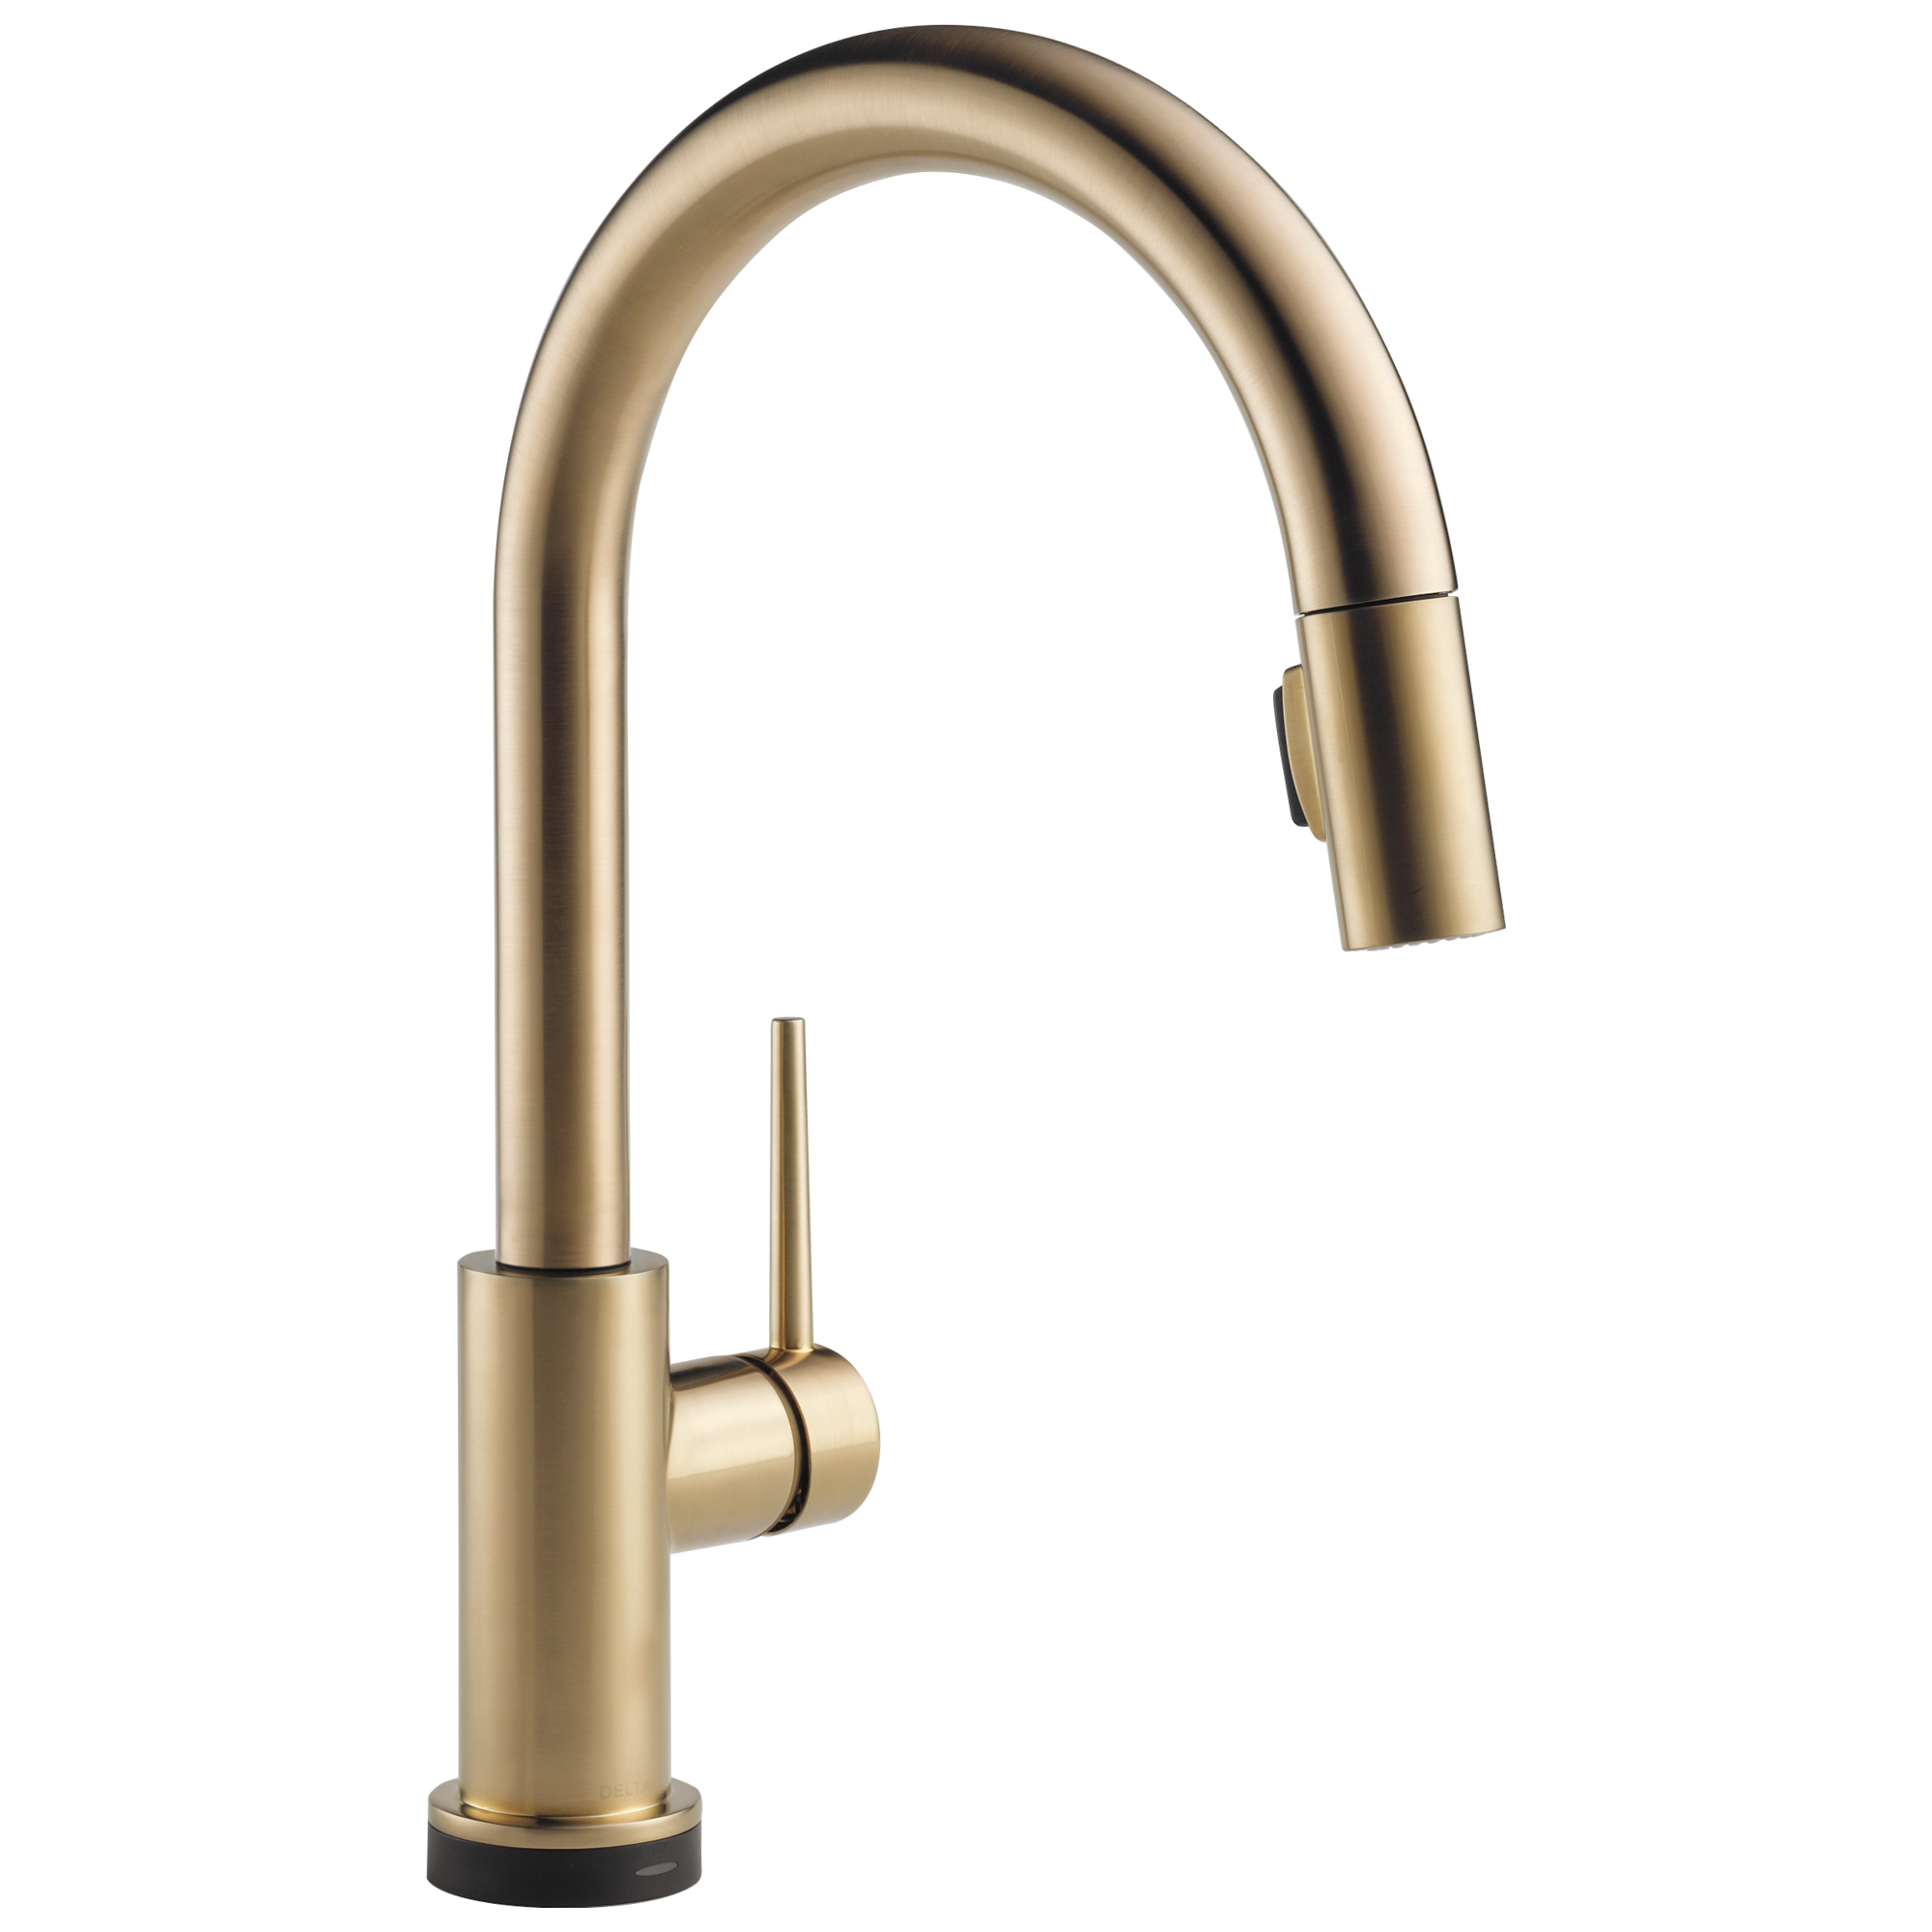 Delta 9159T-DST Trinsic Single Handle Pull-down Kitchen Faucet with Touch2o Technology